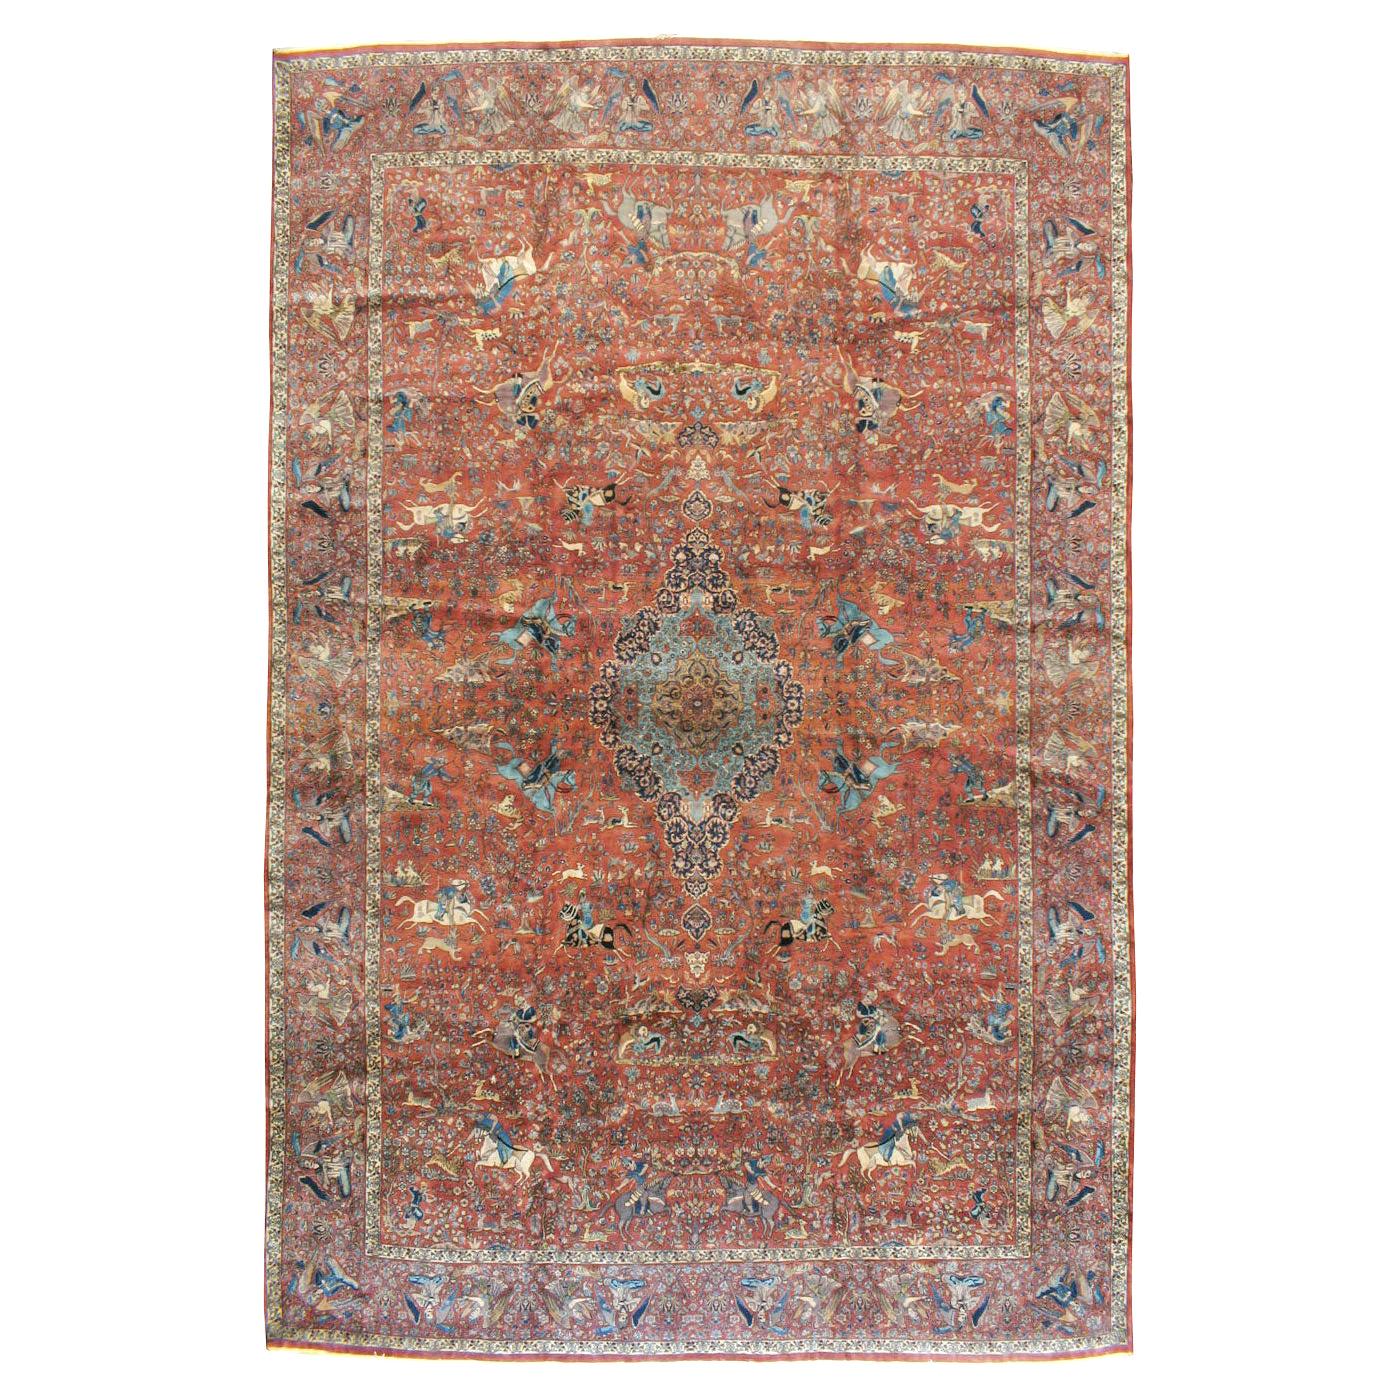 Indo-Tabriz Pictorial Carpet in the Style of the Persian Silk Vienna Hunting Rug